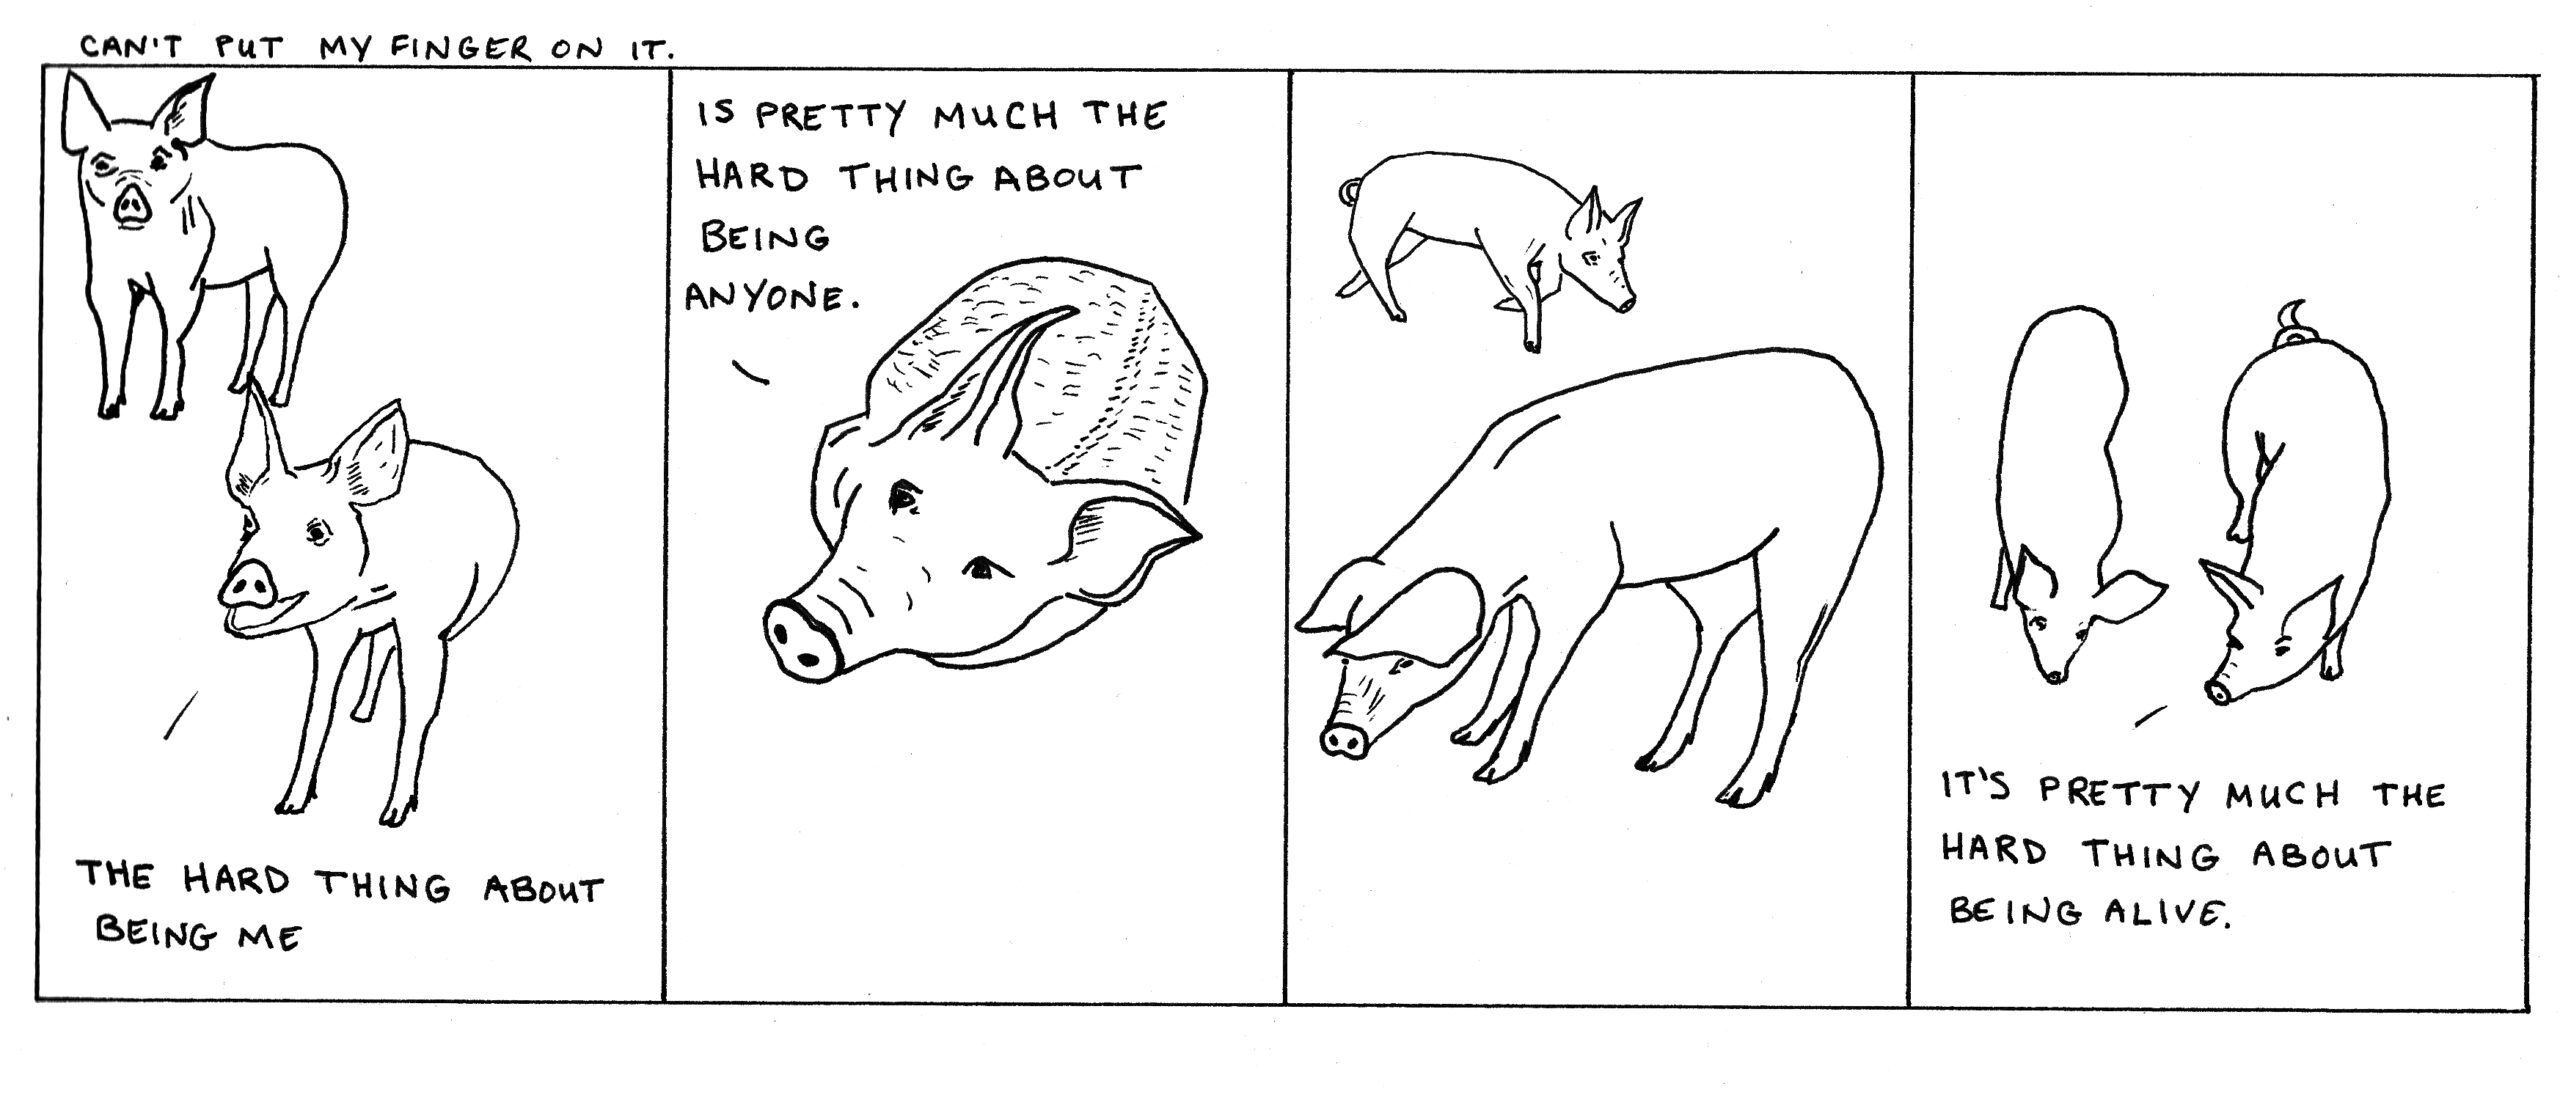 The hard thing about bacon is pigs are so smart